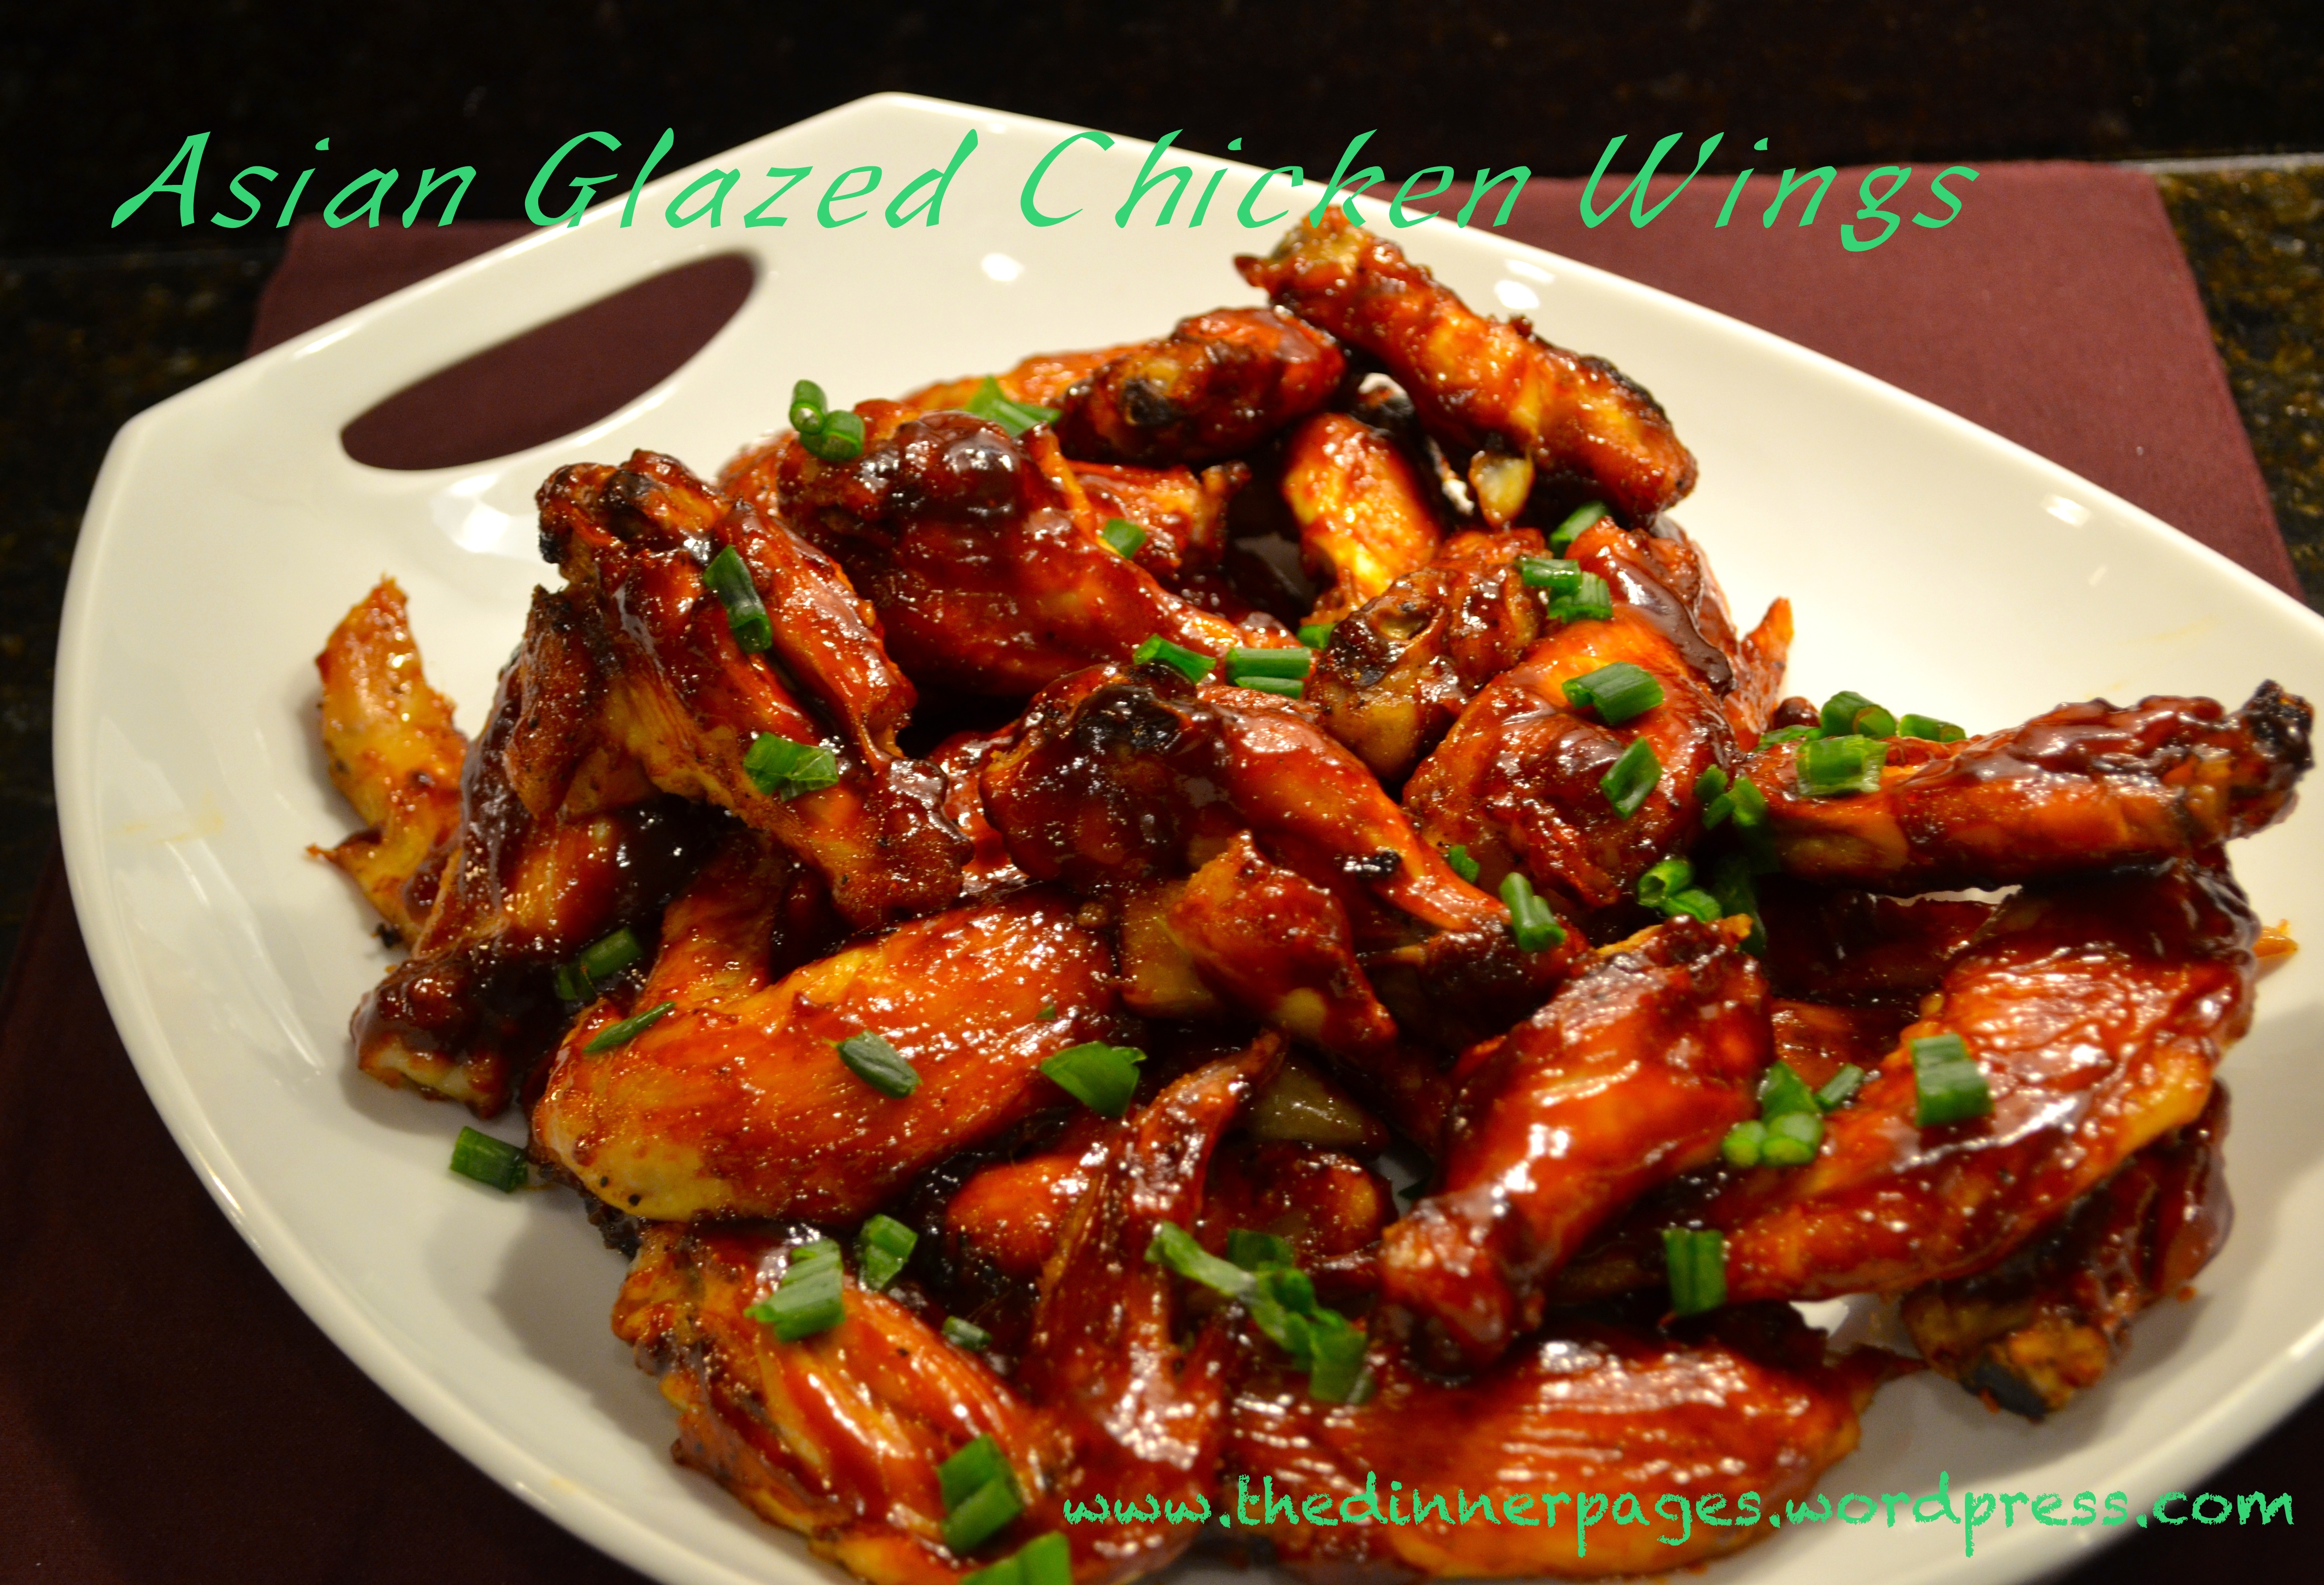 https://thedinnerpages.files.wordpress.com/2013/12/asian-glazed-chicken-wings.jpg